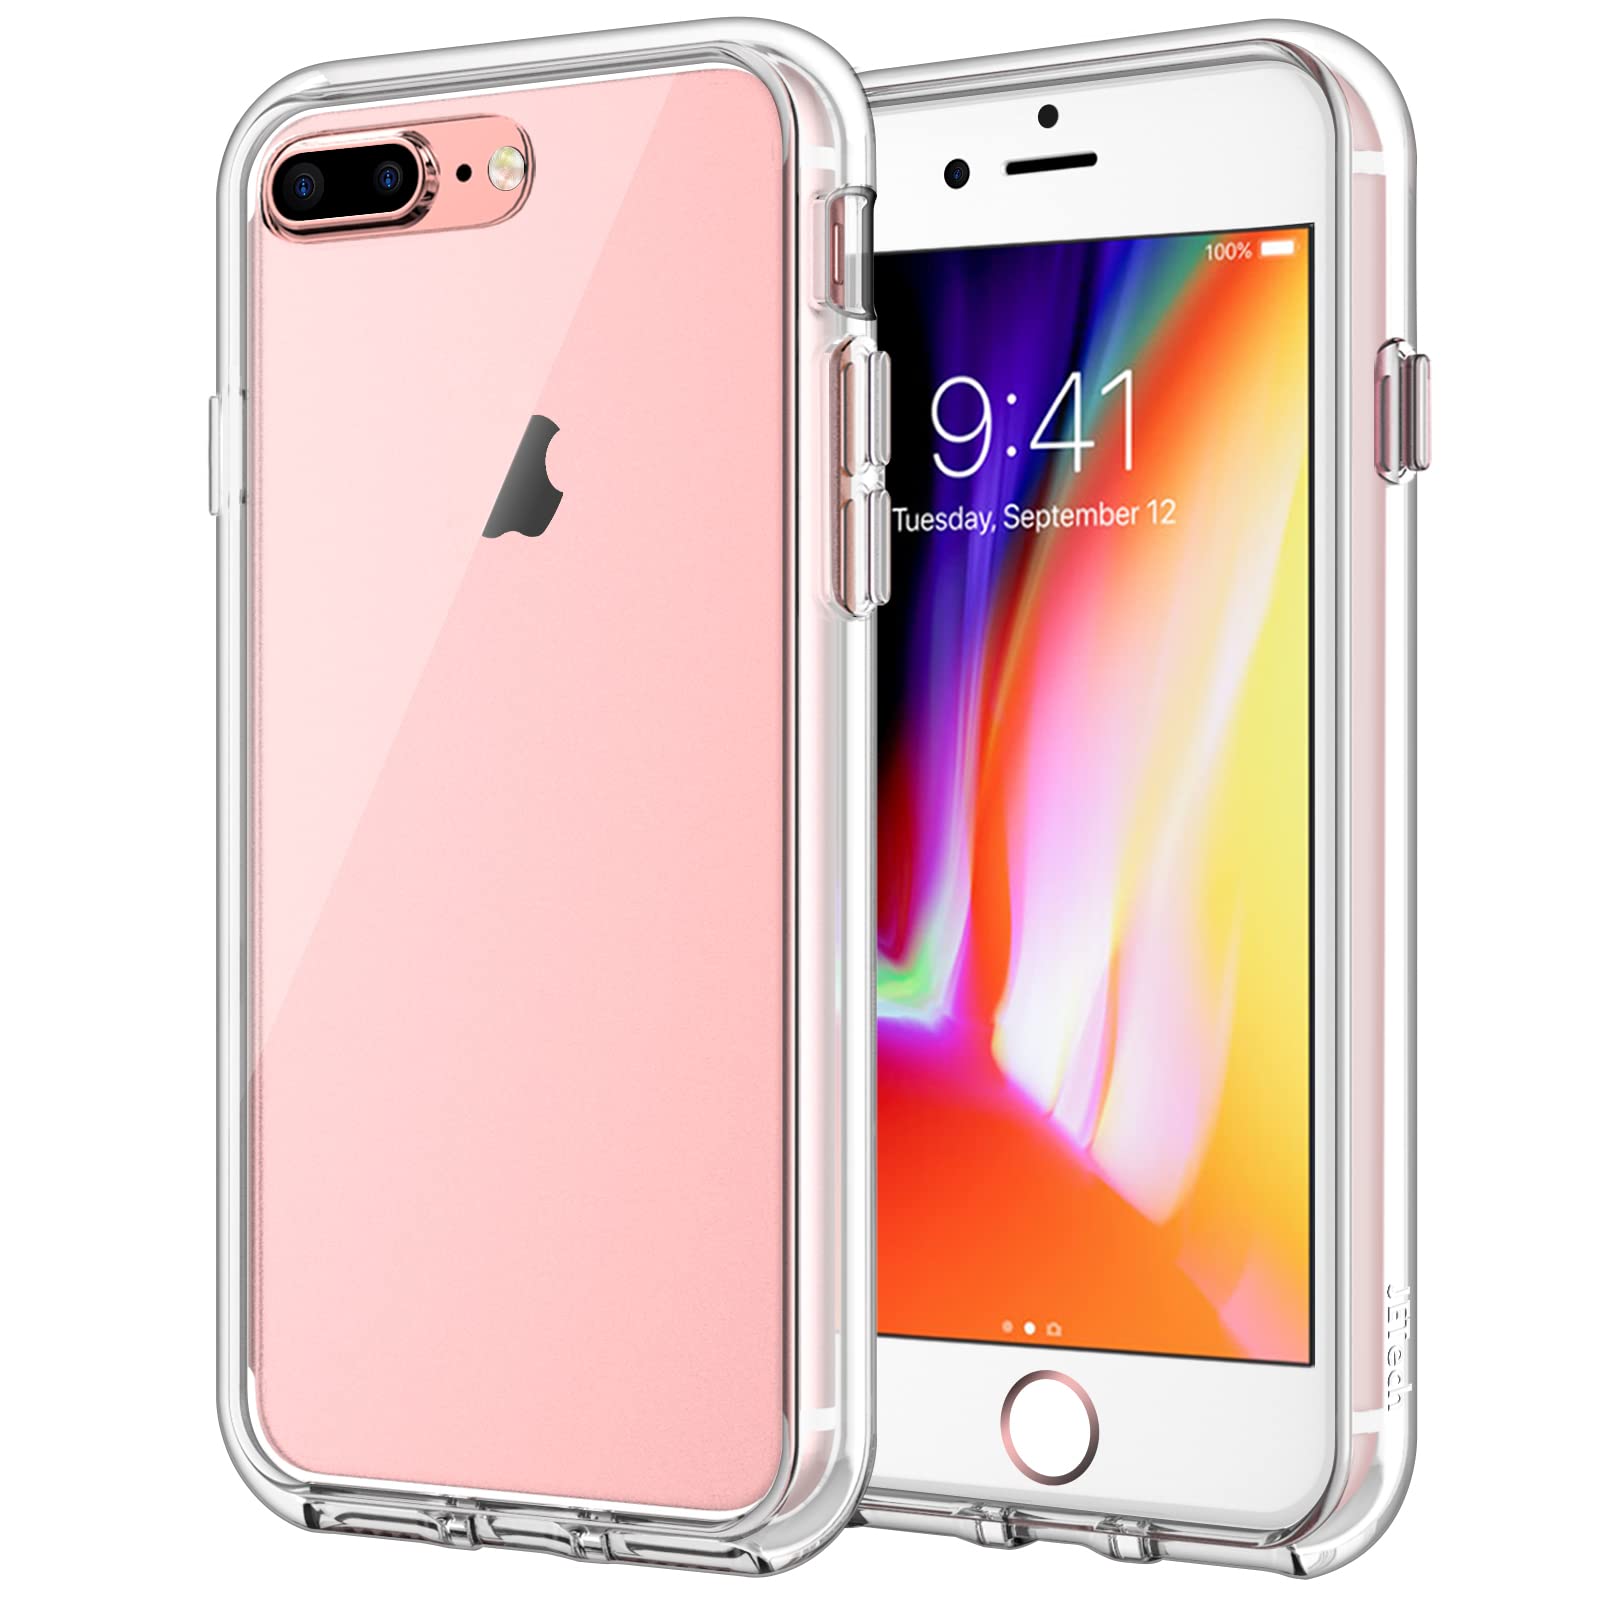 JETech Case for iPhone 8 Plus and iPhone 7 Plus 5.5-Inch, Non-Yellowing Shockproof Phone Bumper Cover, Anti-Scratch Clear Back (Clear)